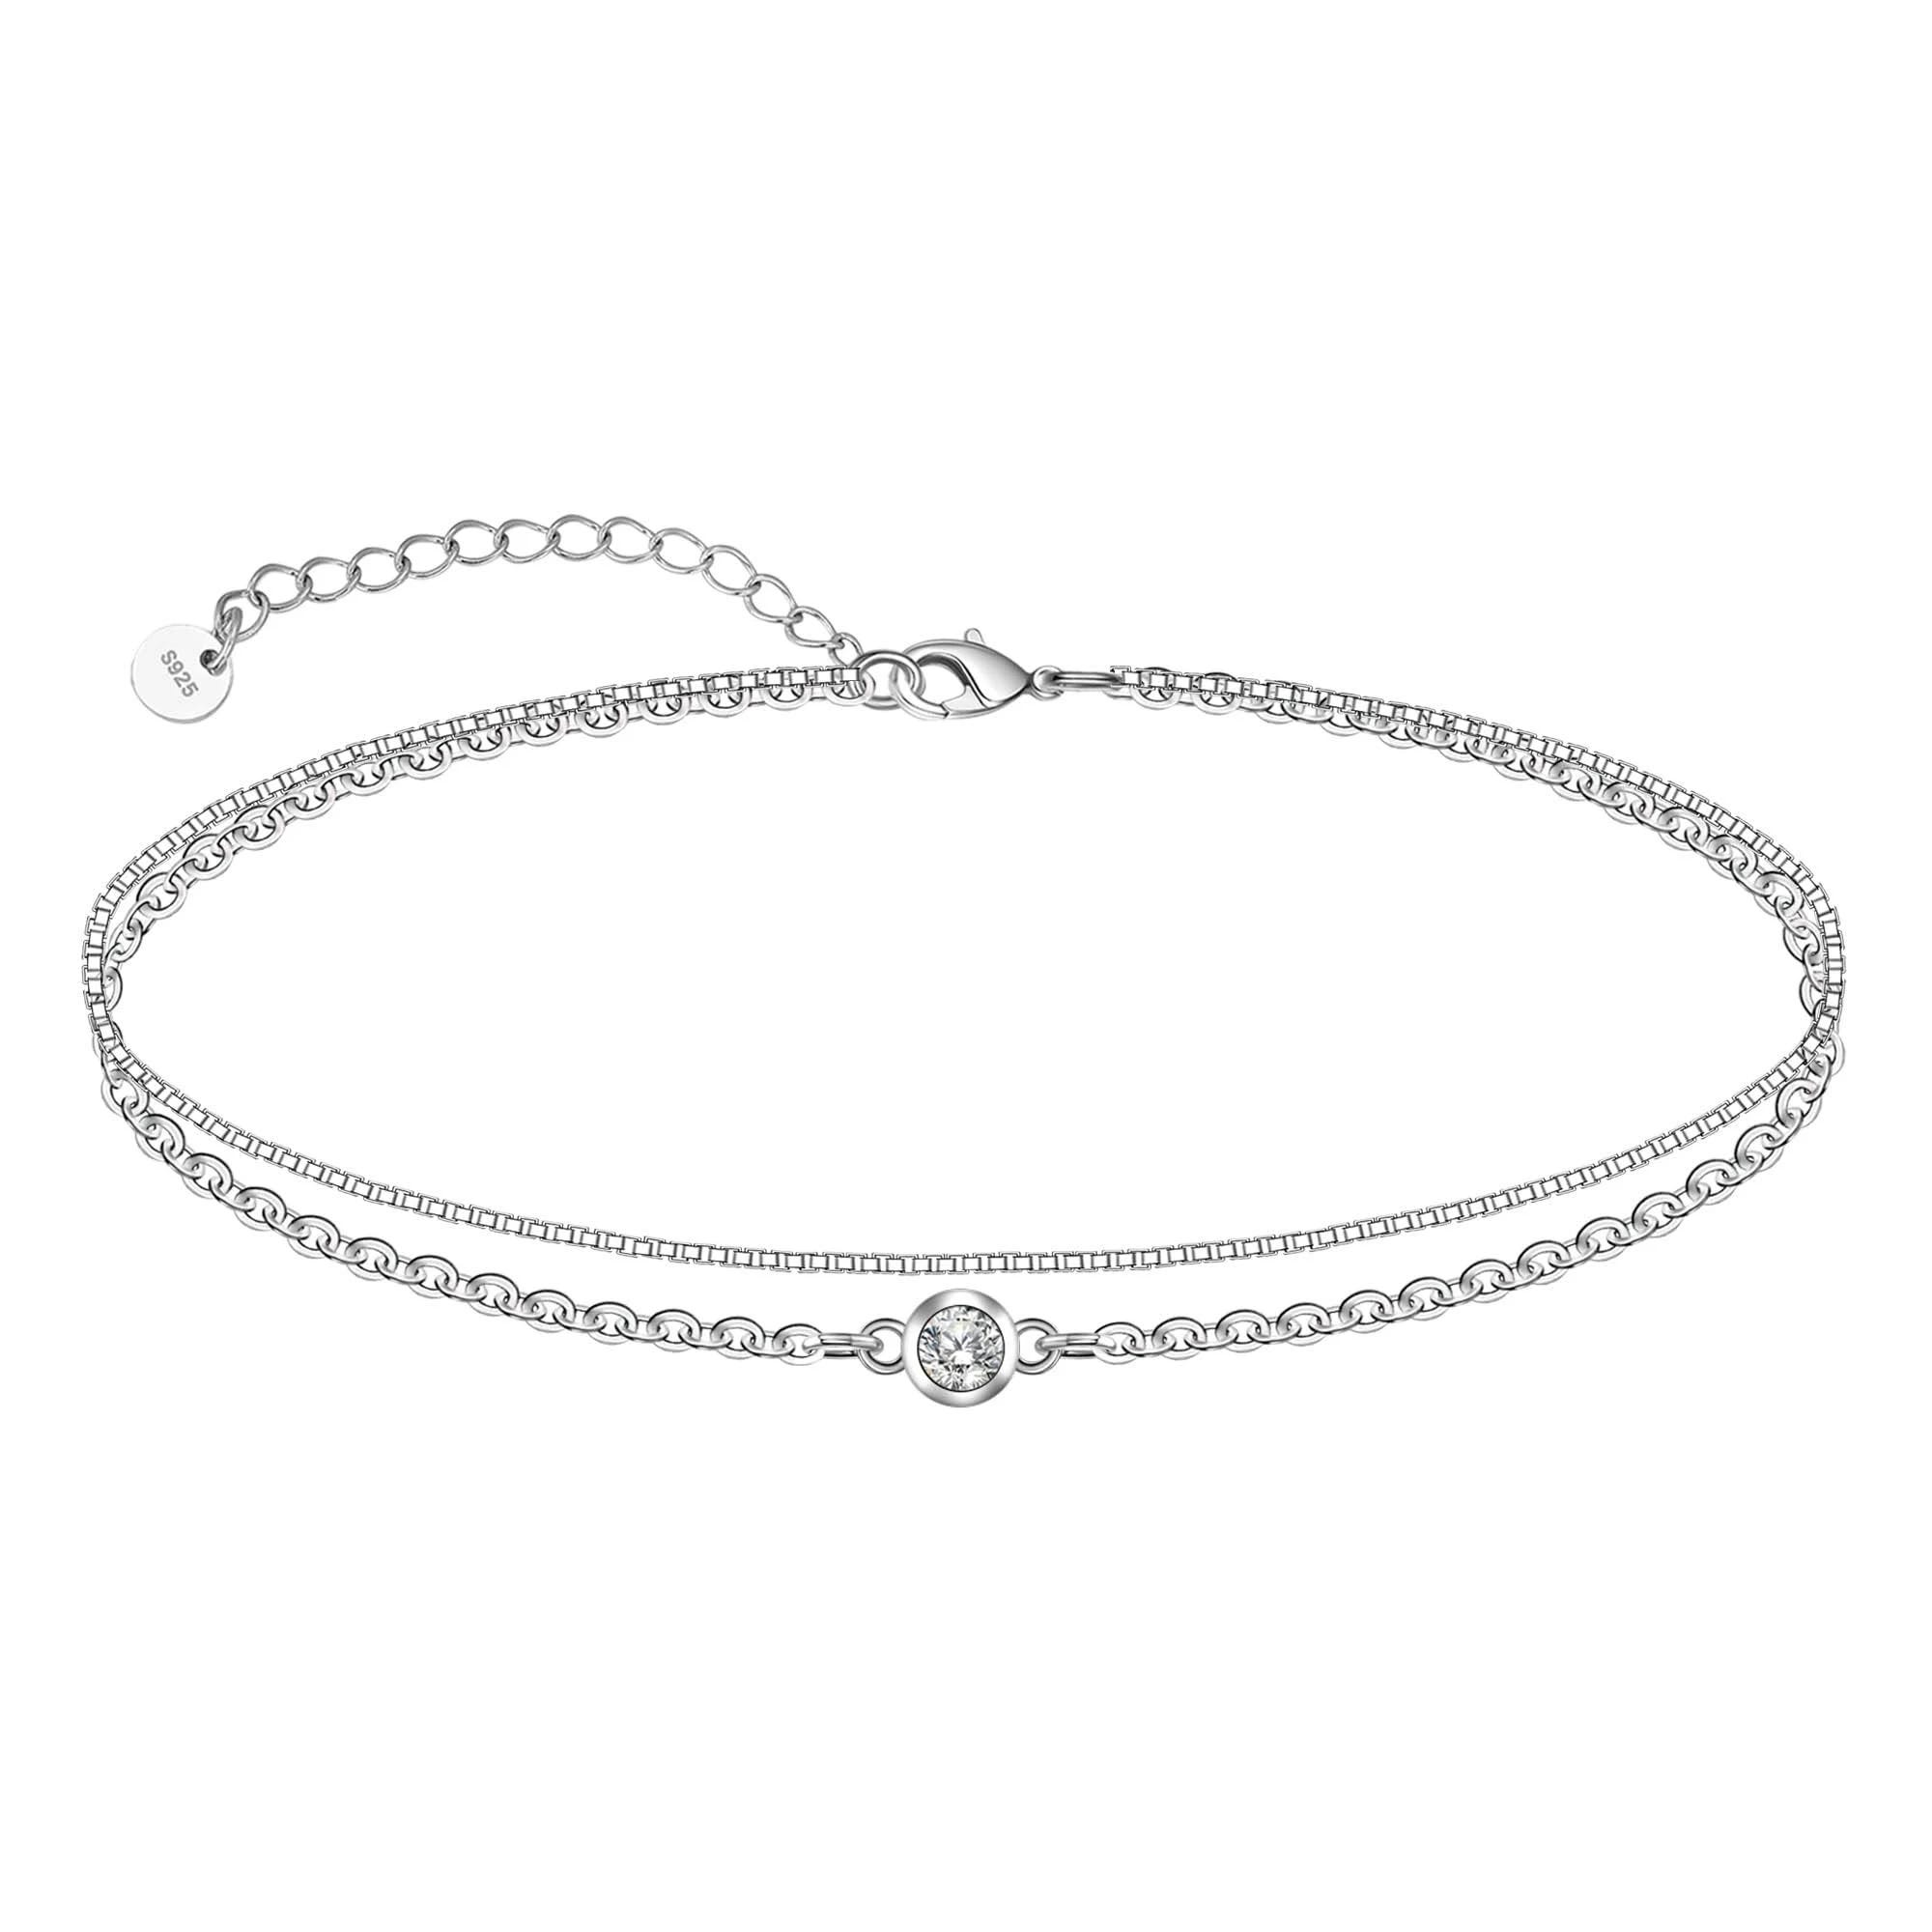 Adorable 925 Sterling Silver Double Layered Anklet for Summer | Image